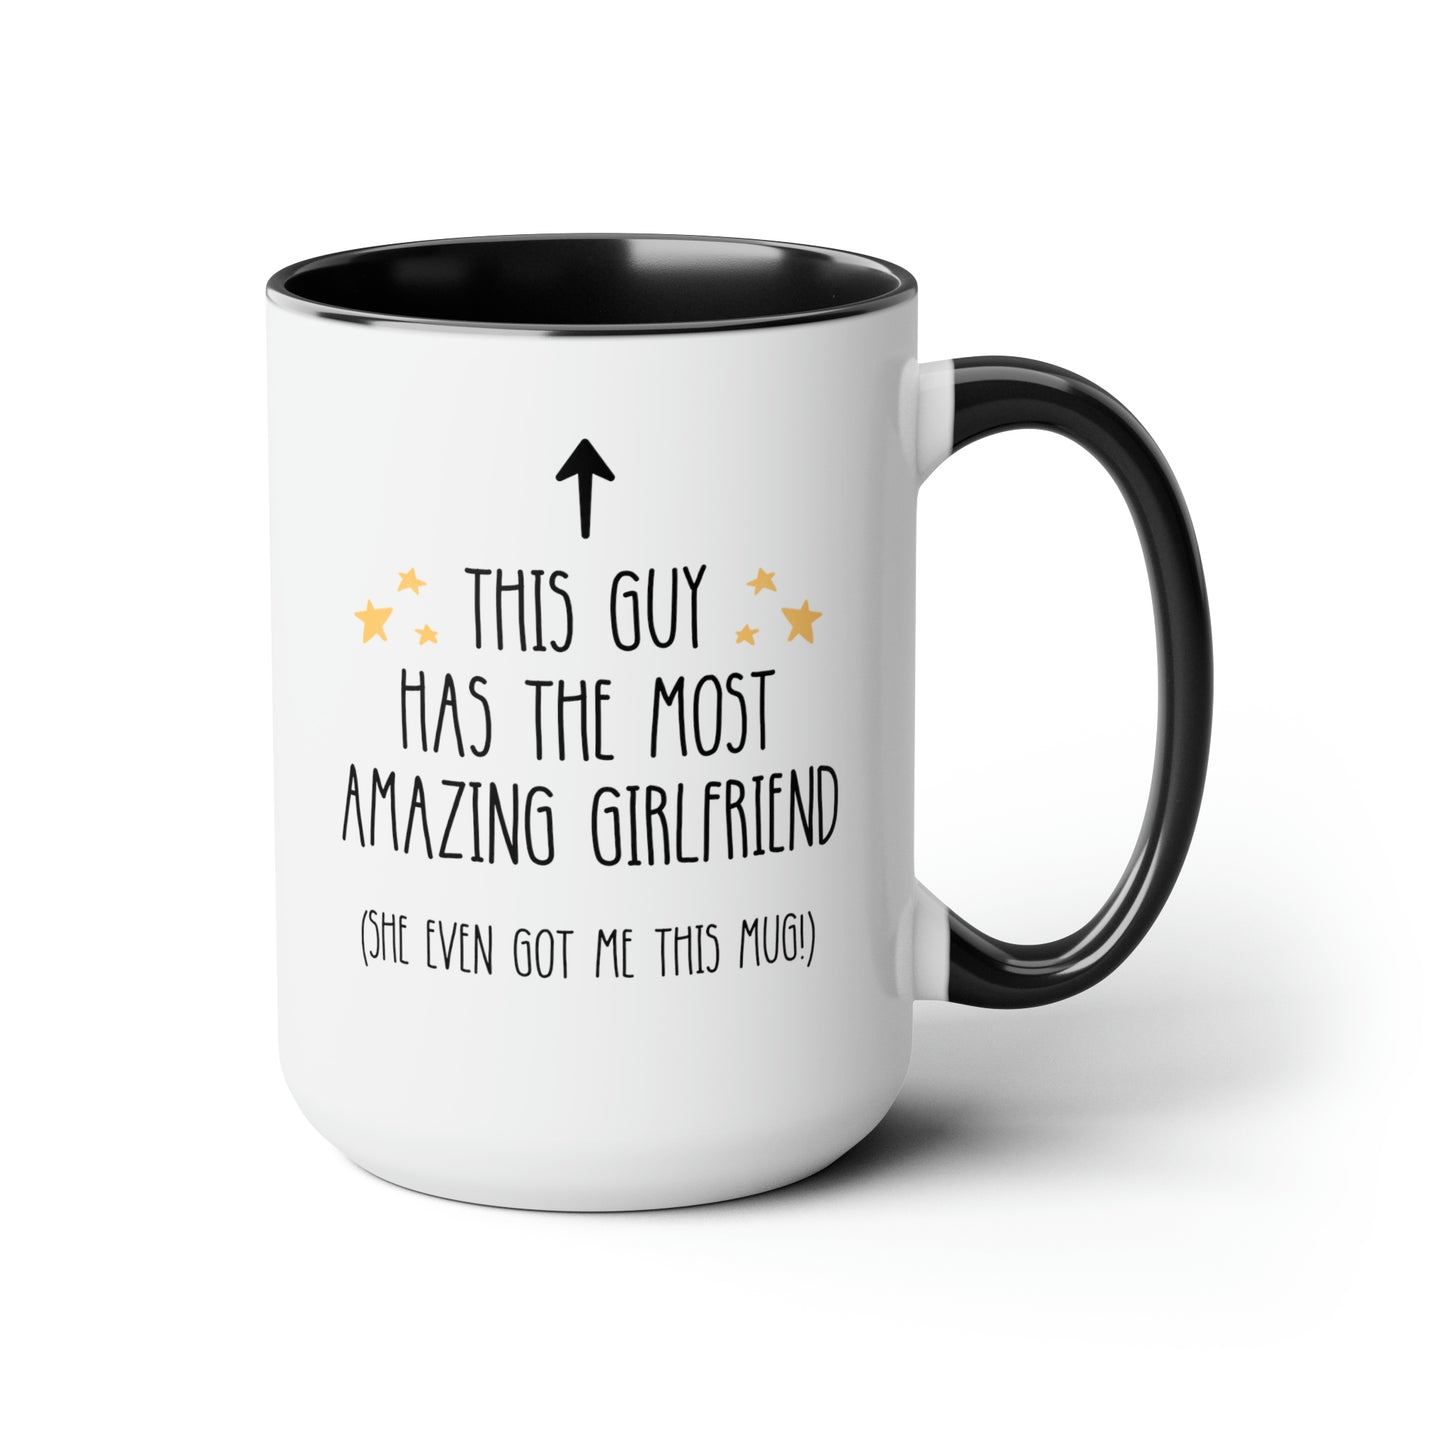 This Guy Has The Most Amazing Girlfriend 15oz white with black accent funny large coffee mug gift for boyfriend anniversary valentines him lover waveywares wavey wares wavywares wavy wares